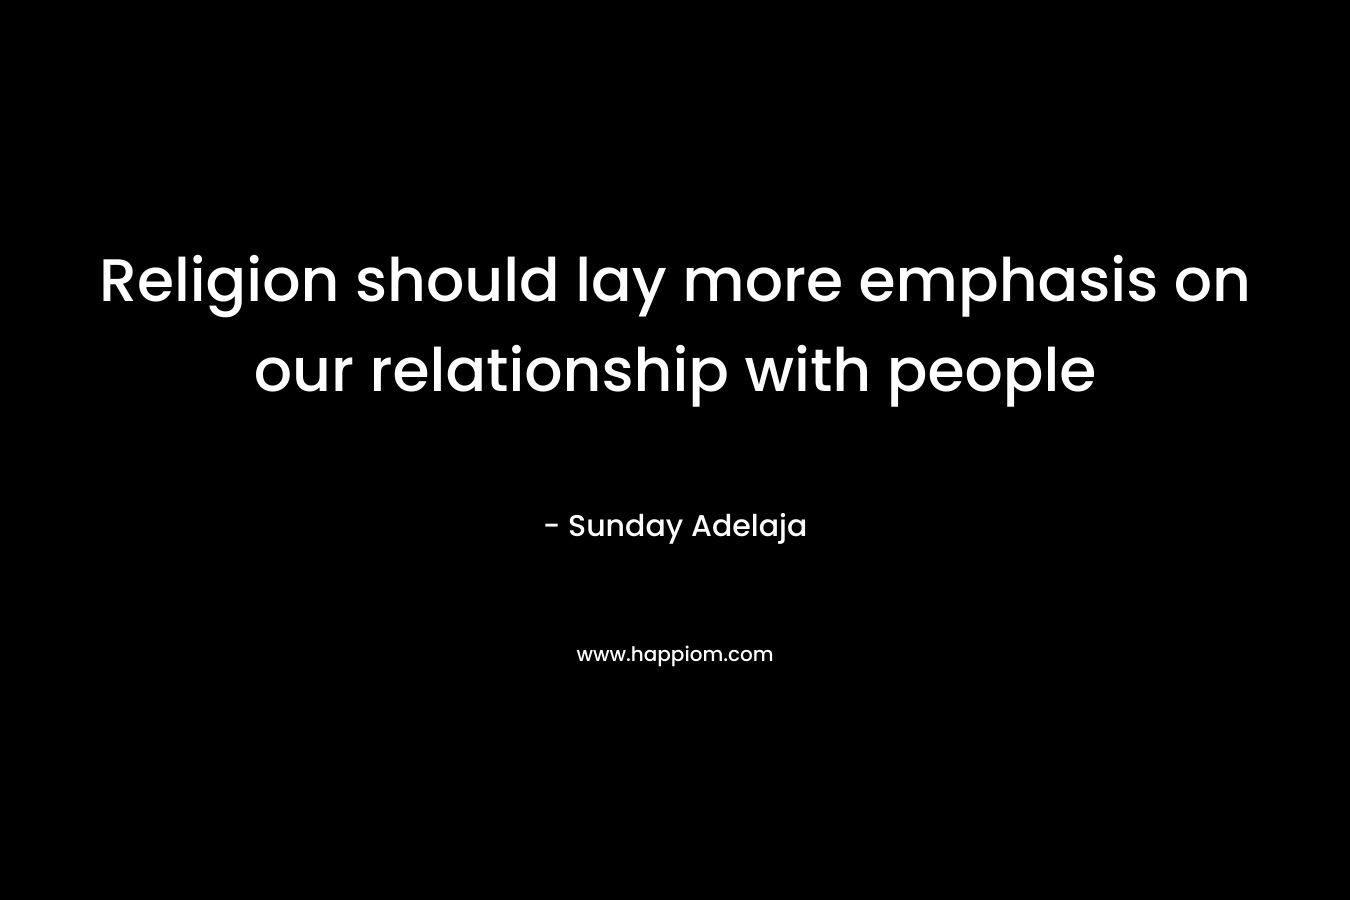 Religion should lay more emphasis on our relationship with people